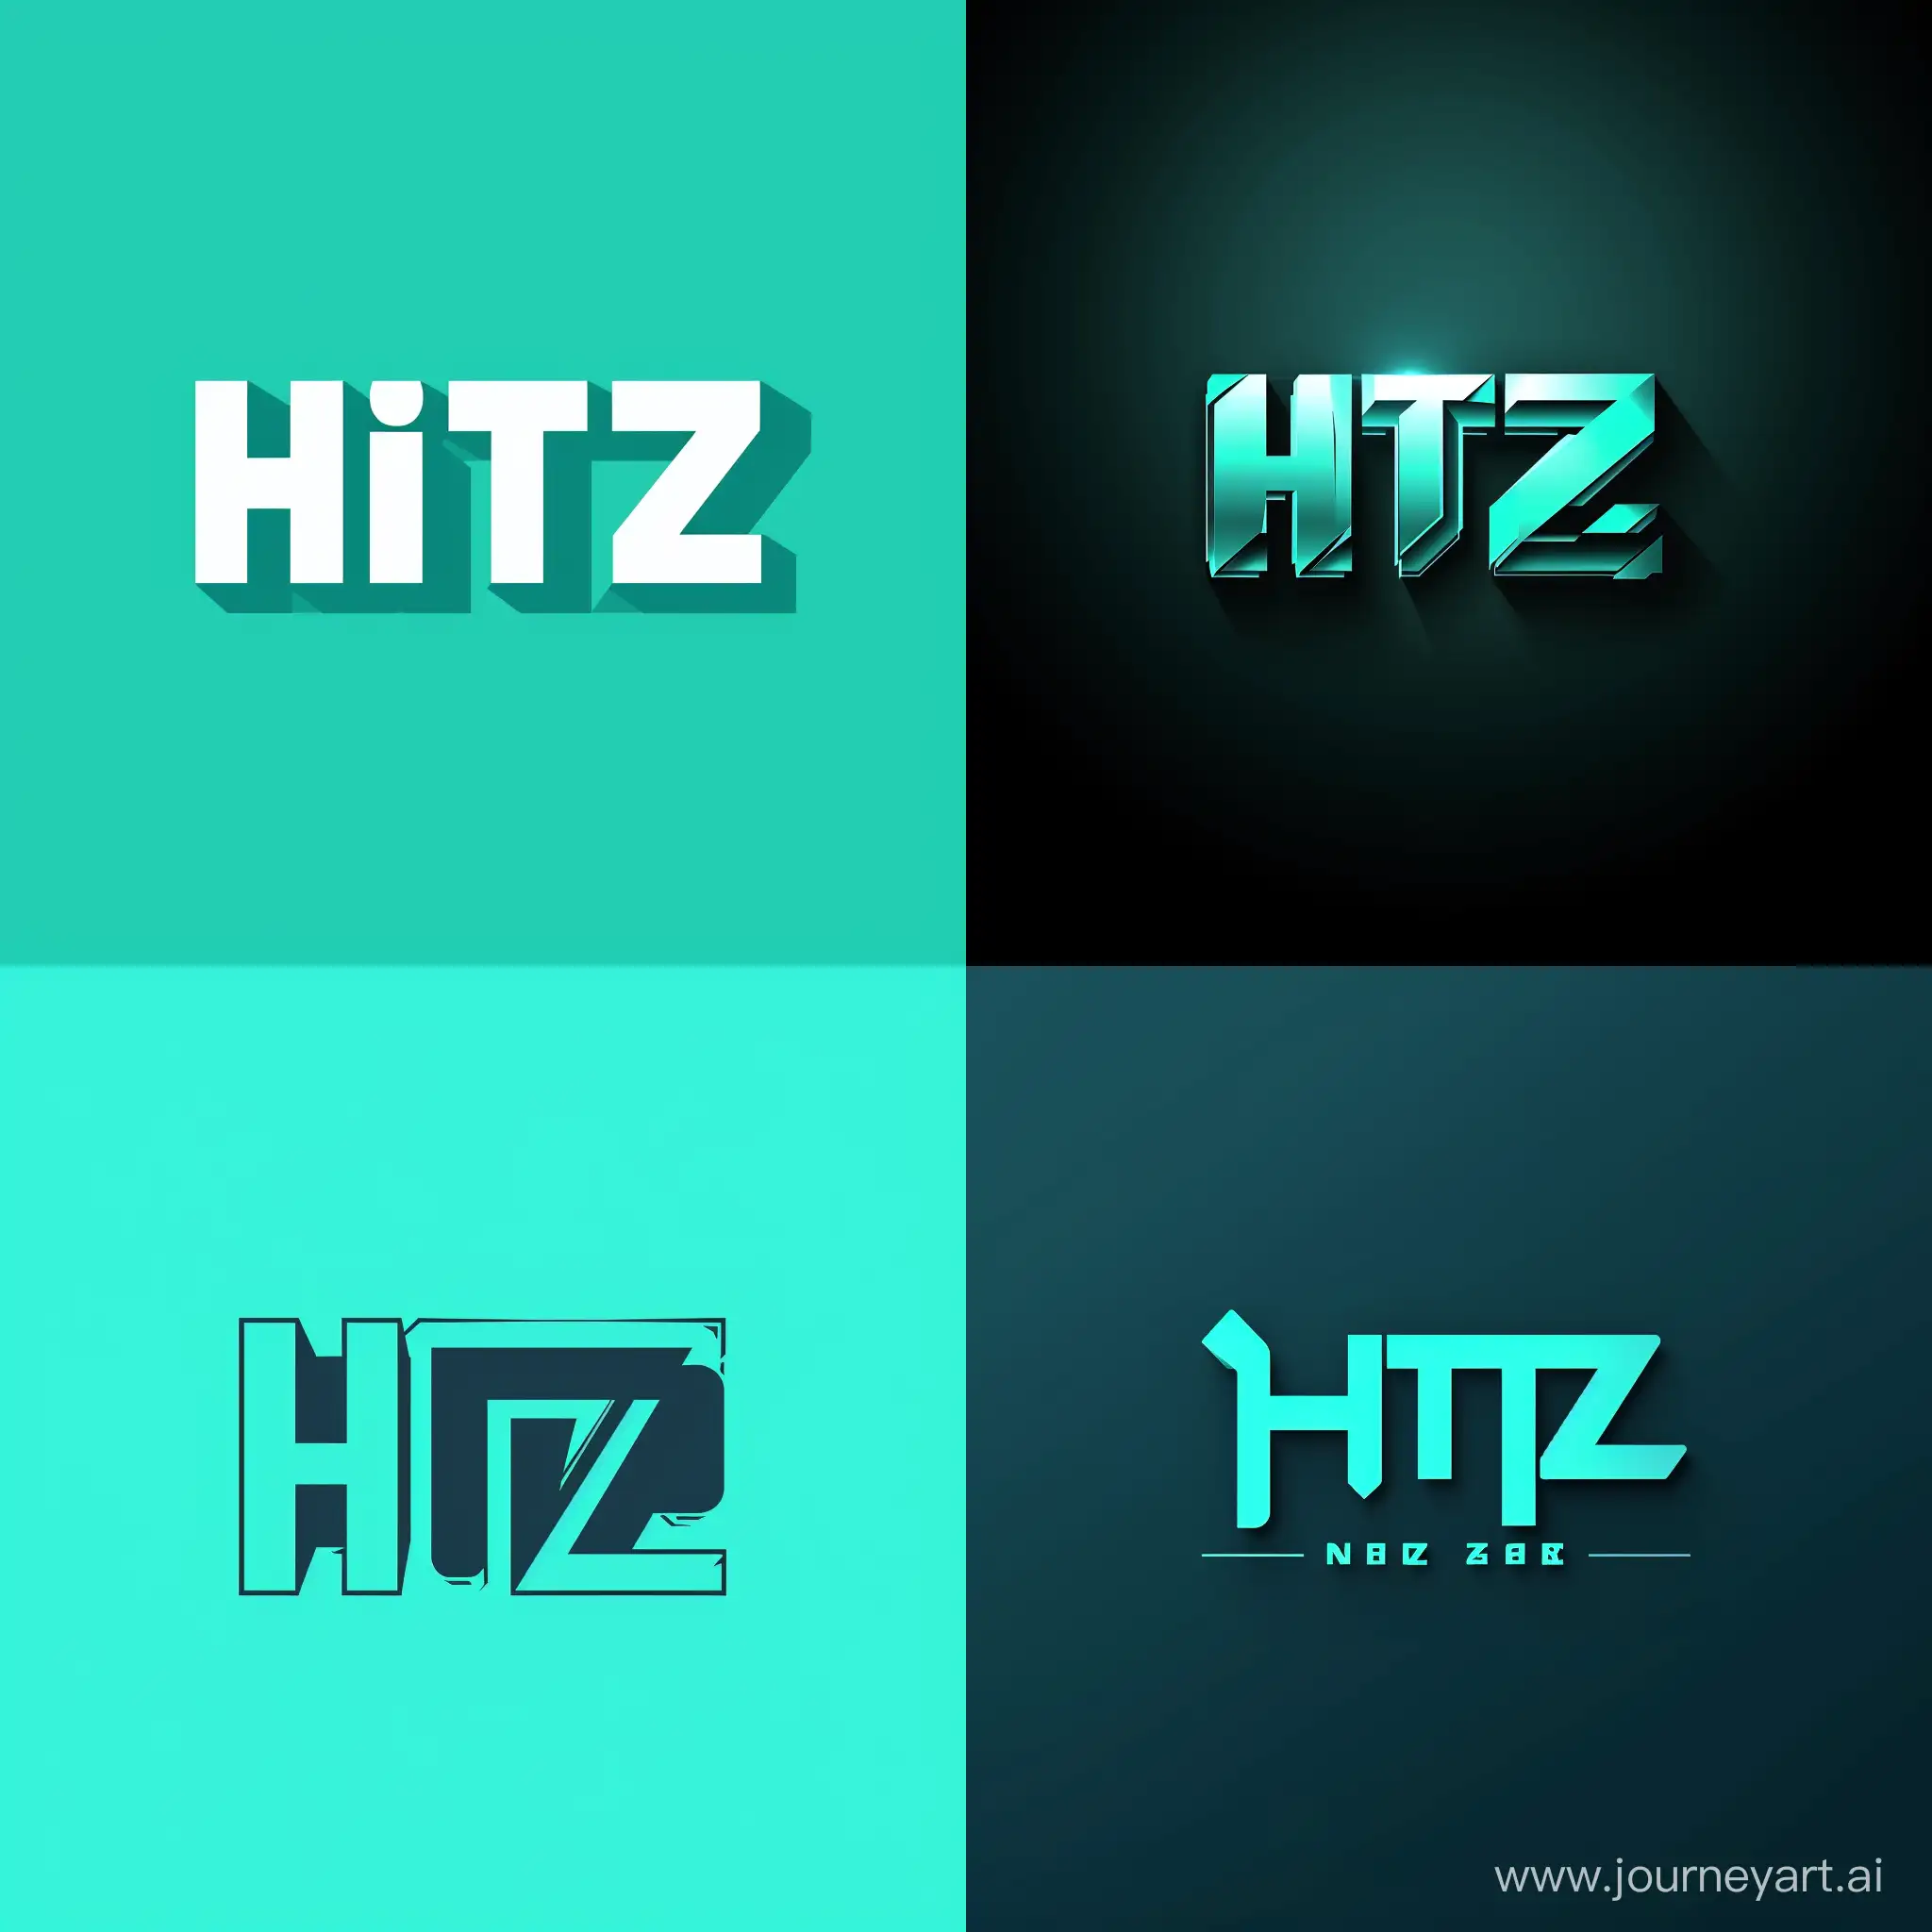 Logo for music streaming service named Hitz in aqua color and classic font style or in icon style without text